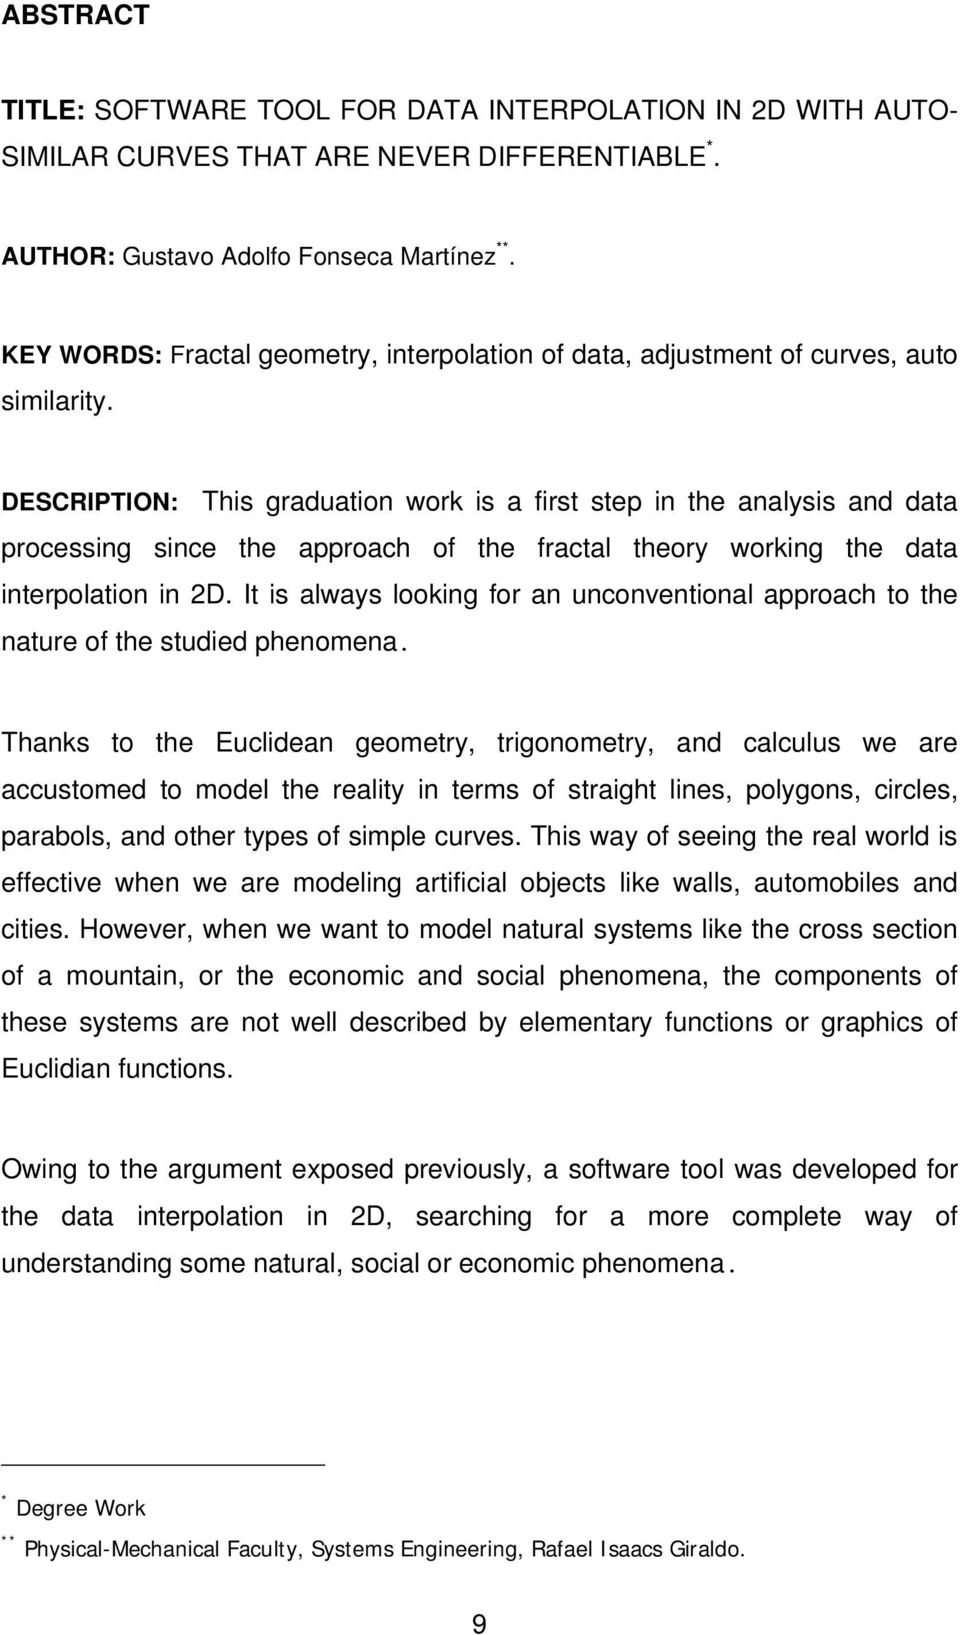 DESCRIPTION: This graduation work is a first step in the analysis and data processing since the approach of the fractal theory working the data interpolation in 2D.